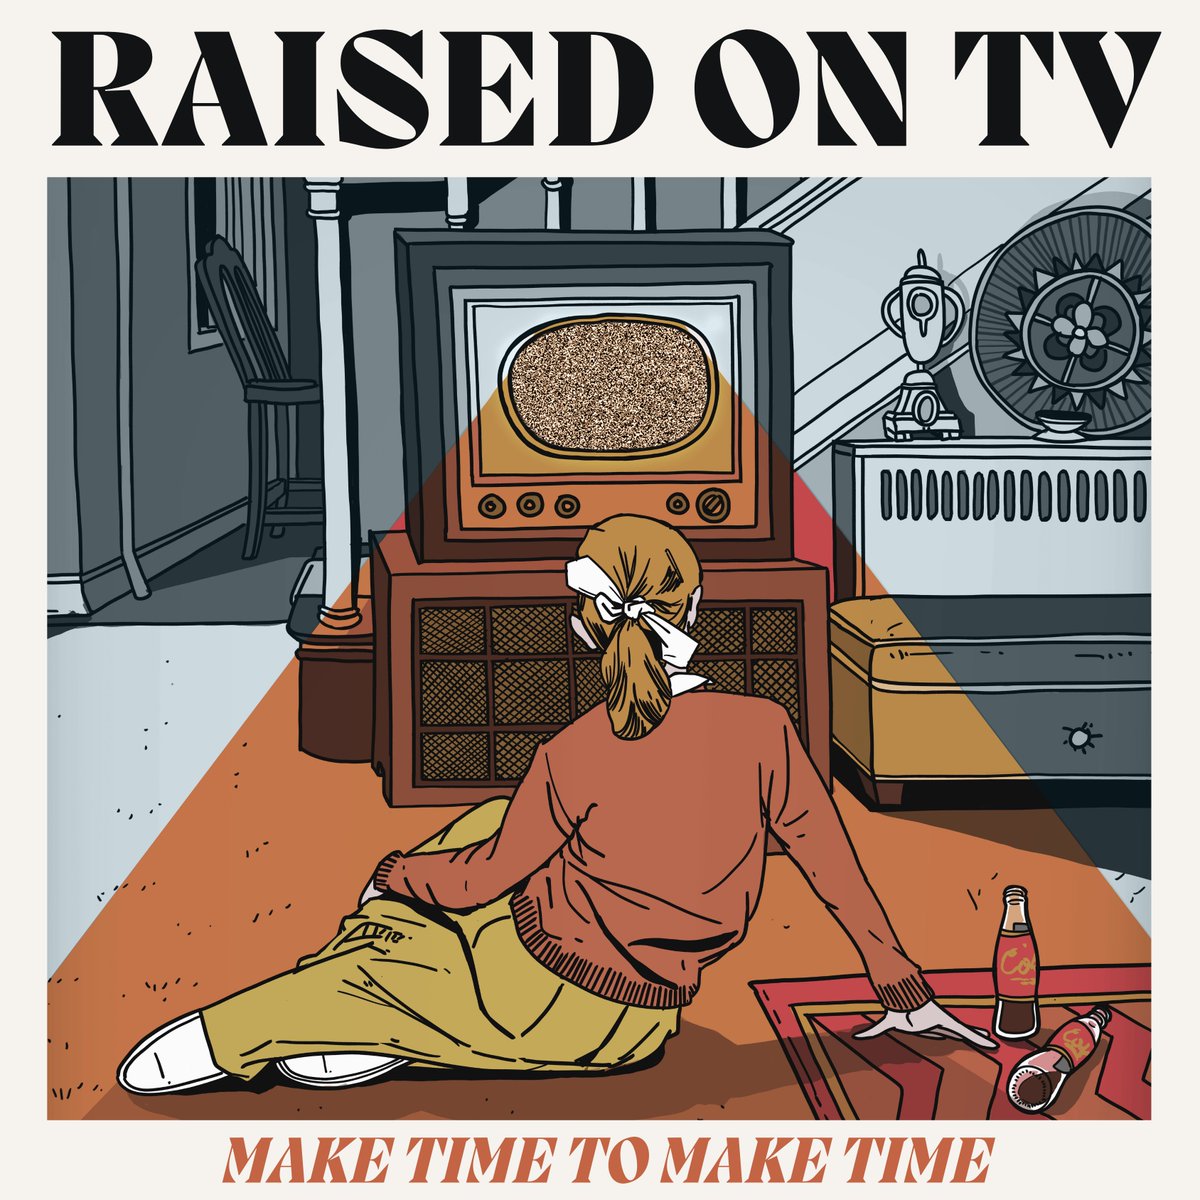 We have a new song out! “Take Me Home” is part of our new album “Make Time to Make Time” which will be out on 5/31 on @selltheheart Records! #indierock #newsong #raisedontv #newalbum #rockmusic #selltheheartrecords #vinyl #weloveyou

ffm.to/takemehomerais…